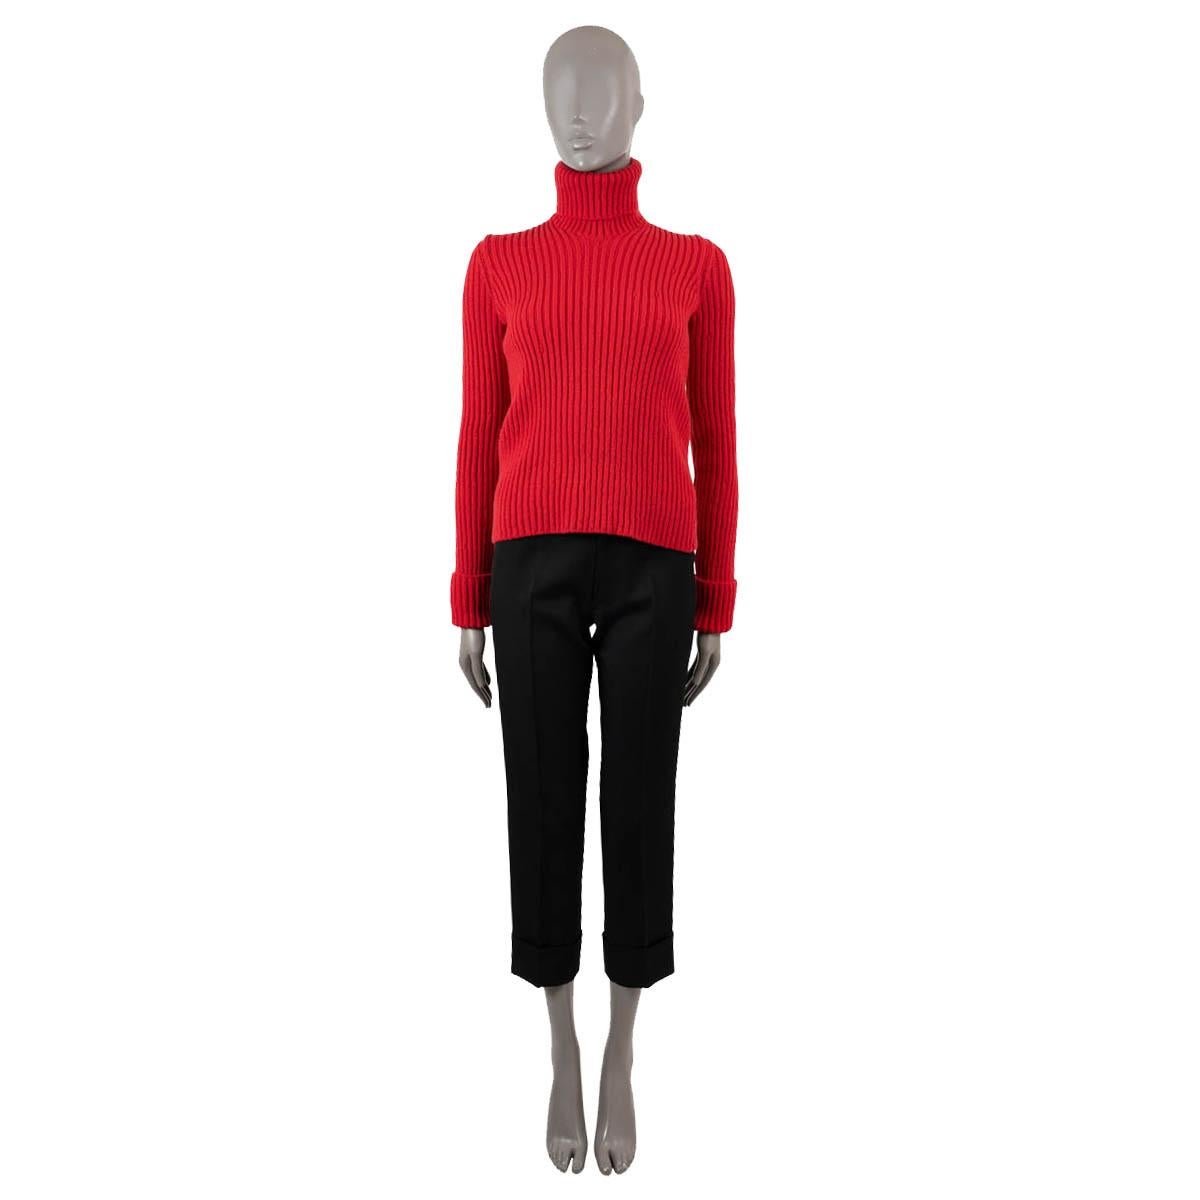 100% authentic Bottega Veneta turtleneck sweater in red distorted rib-knit wool (90%), polyamide (9%) and elastane (1%). Unlined. Has been worn and is in excellent condition.

2020 Fall/Winter

Measurements
Model	641065 V08G0
Tag